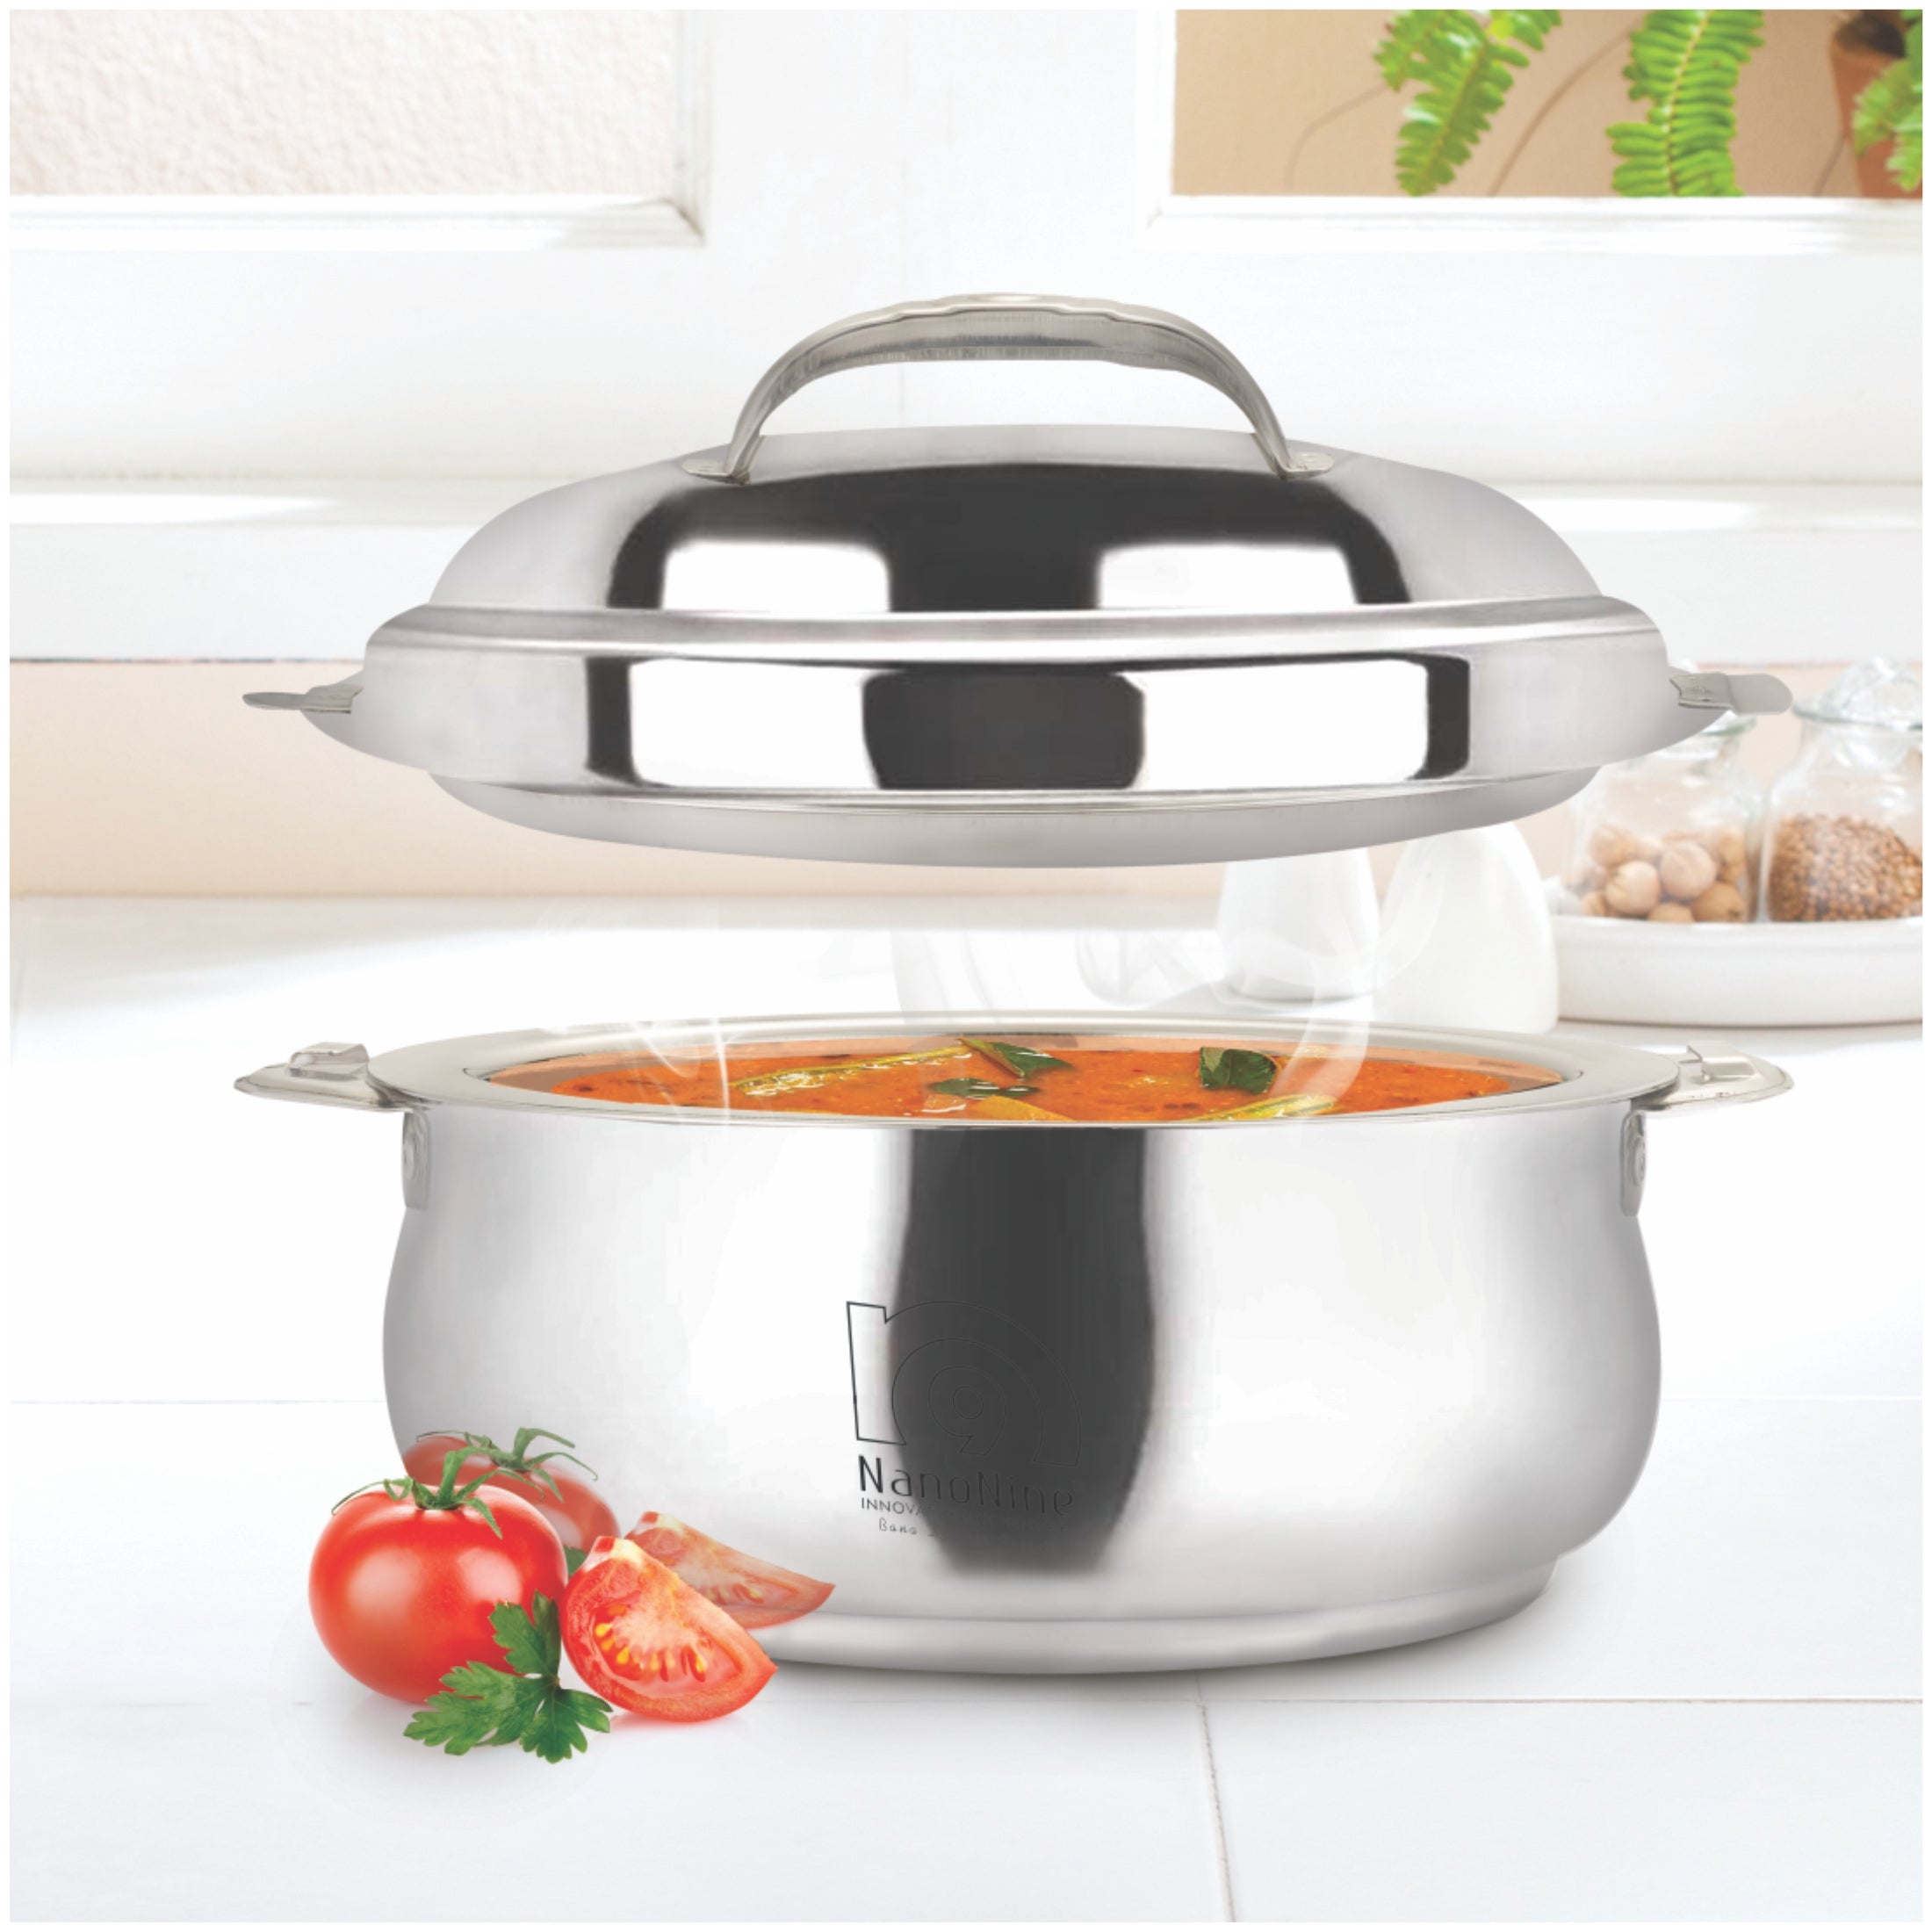 NanoNine Belly Premium 1.1 L Double Wall Insulated Hot Pot Stainless Steel Casserole with Steel Lid.